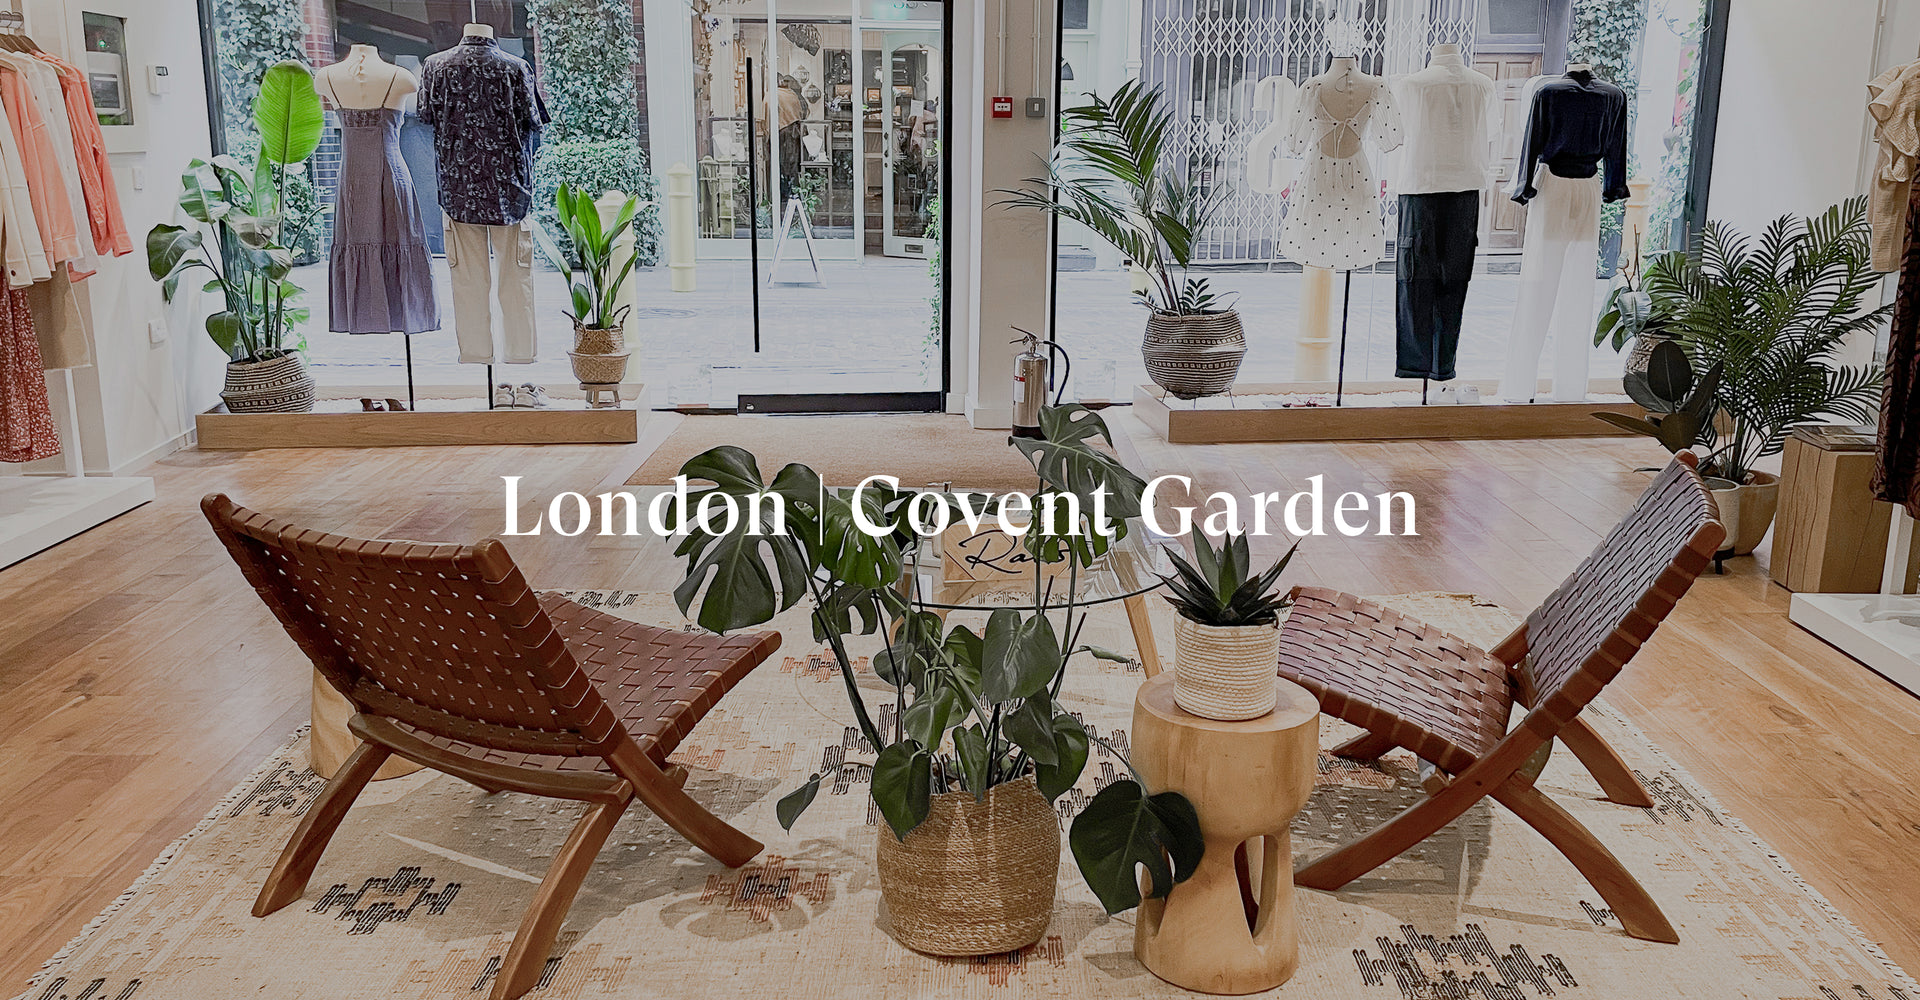 IMAGE SHOWS INSIDE OF LONDON COVENT GARDEN STORE